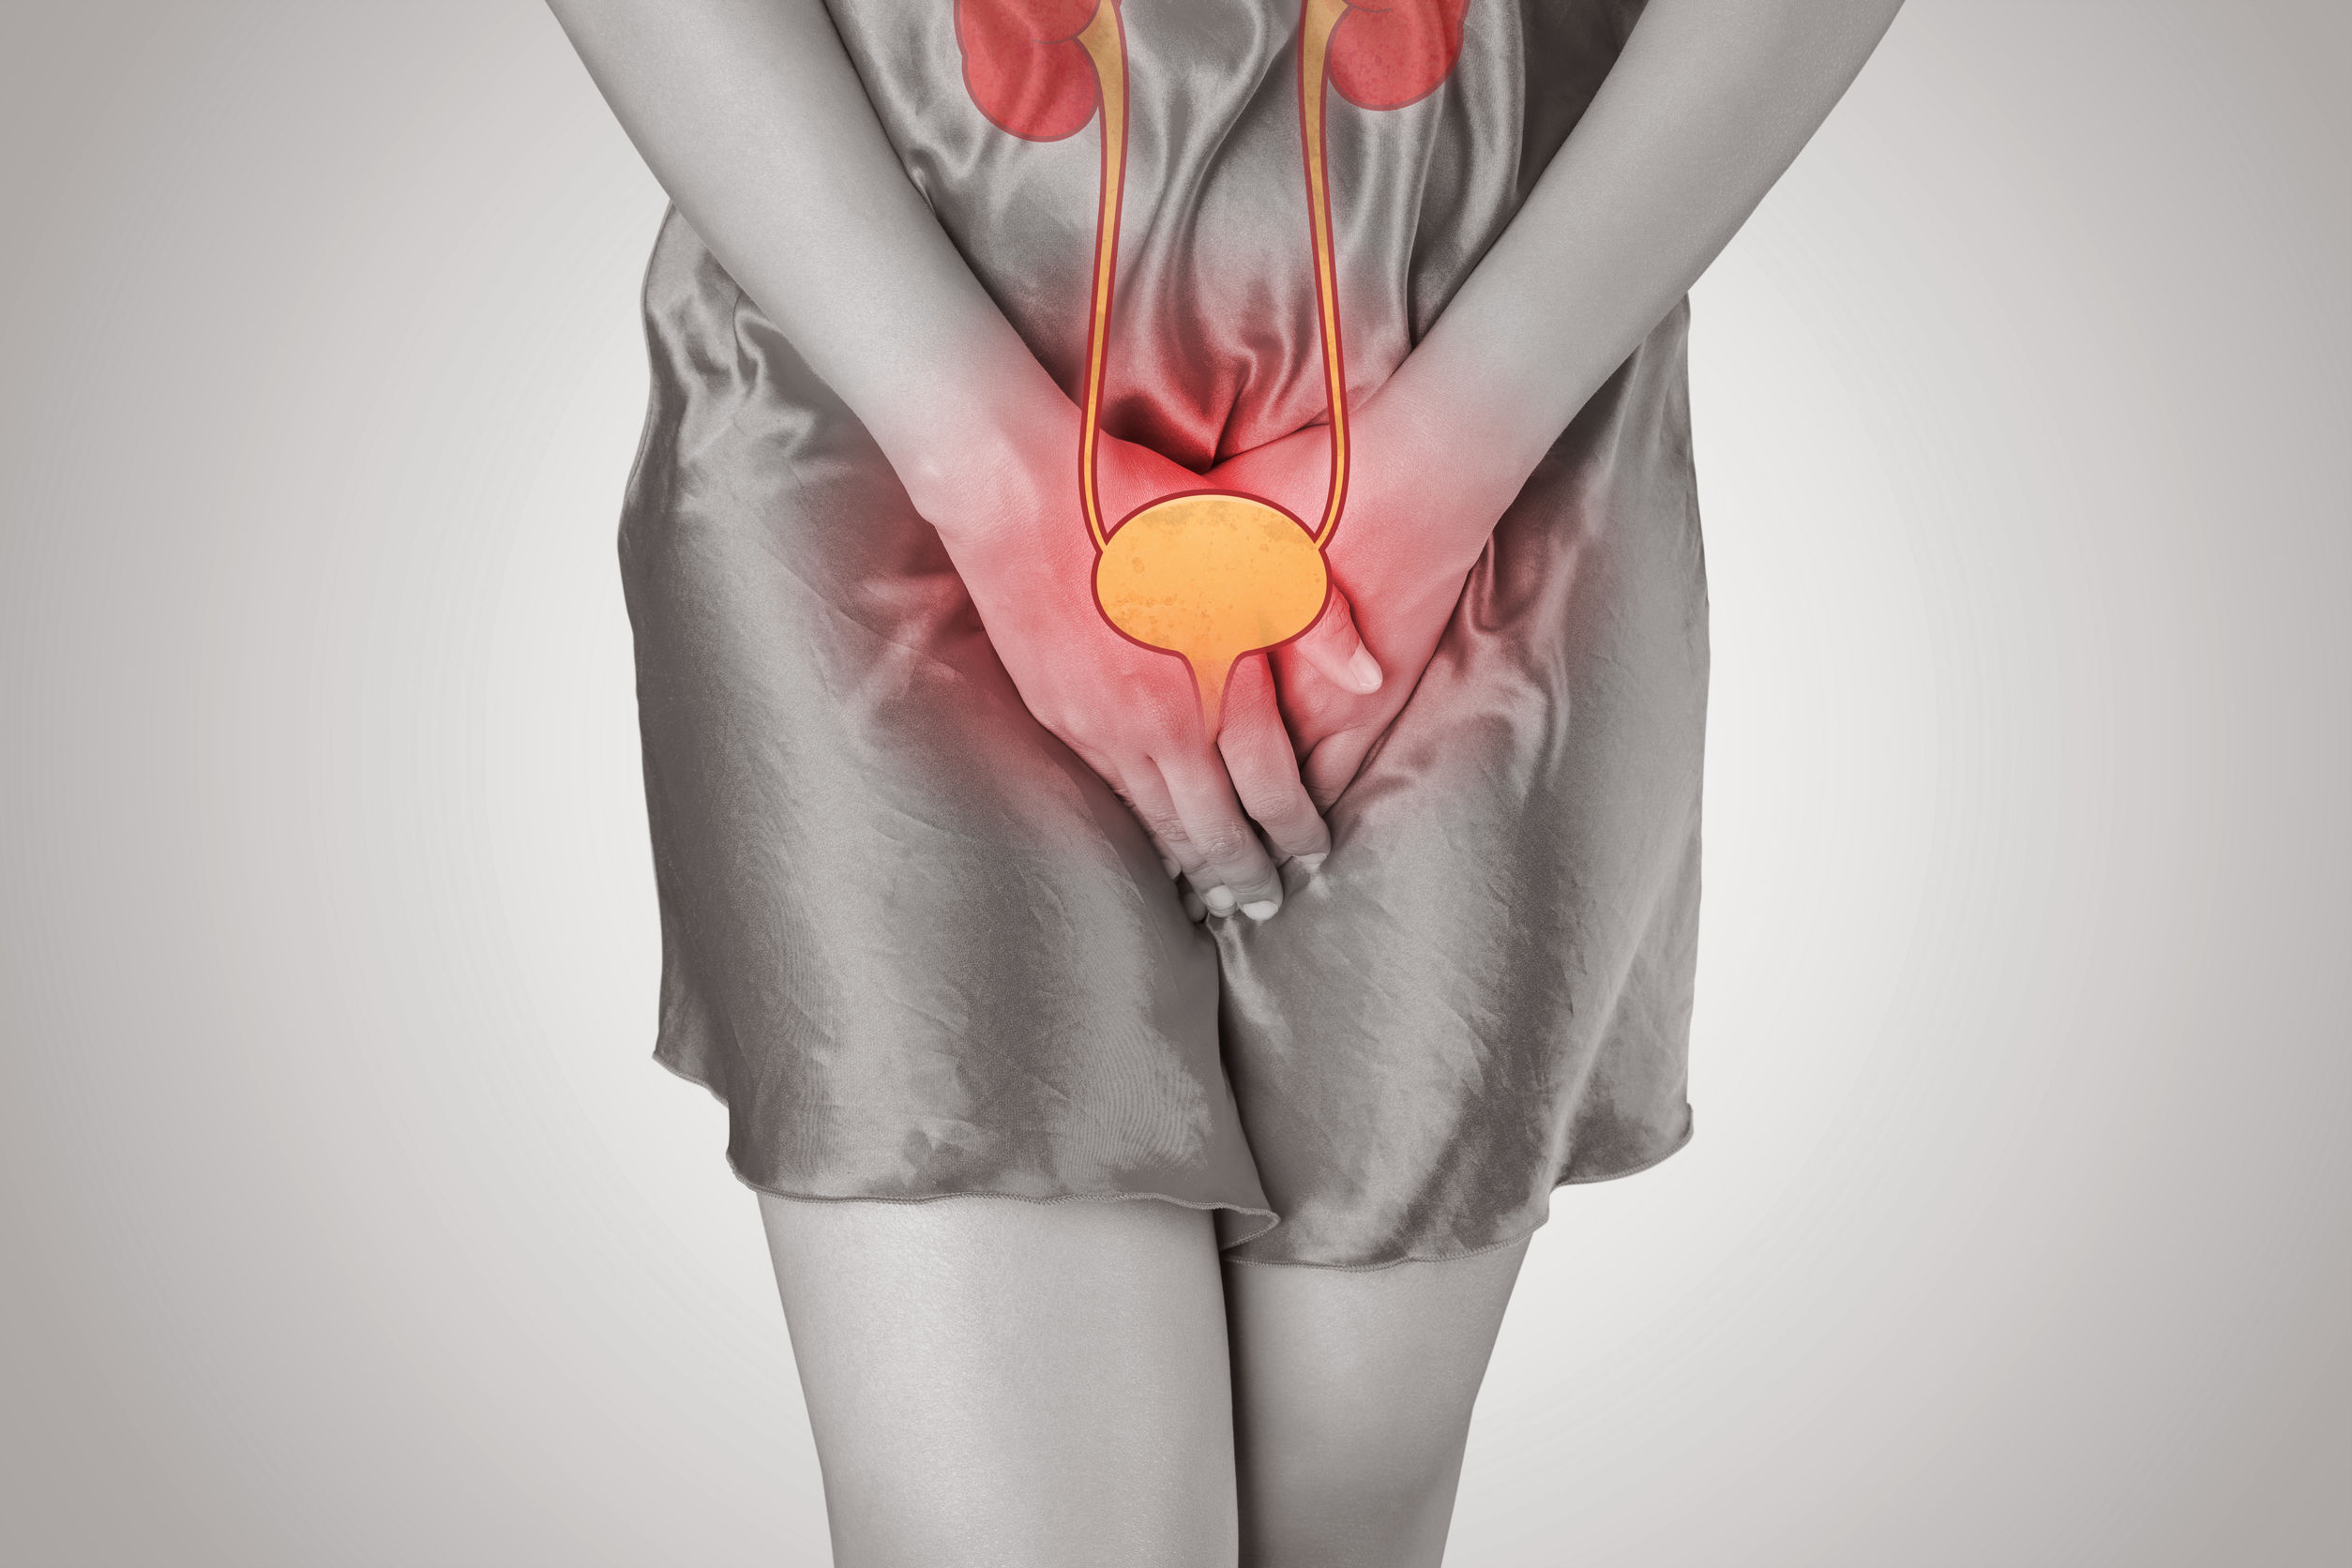 dr-angela-urinary-tract-infection-uti-urinary-system-woman